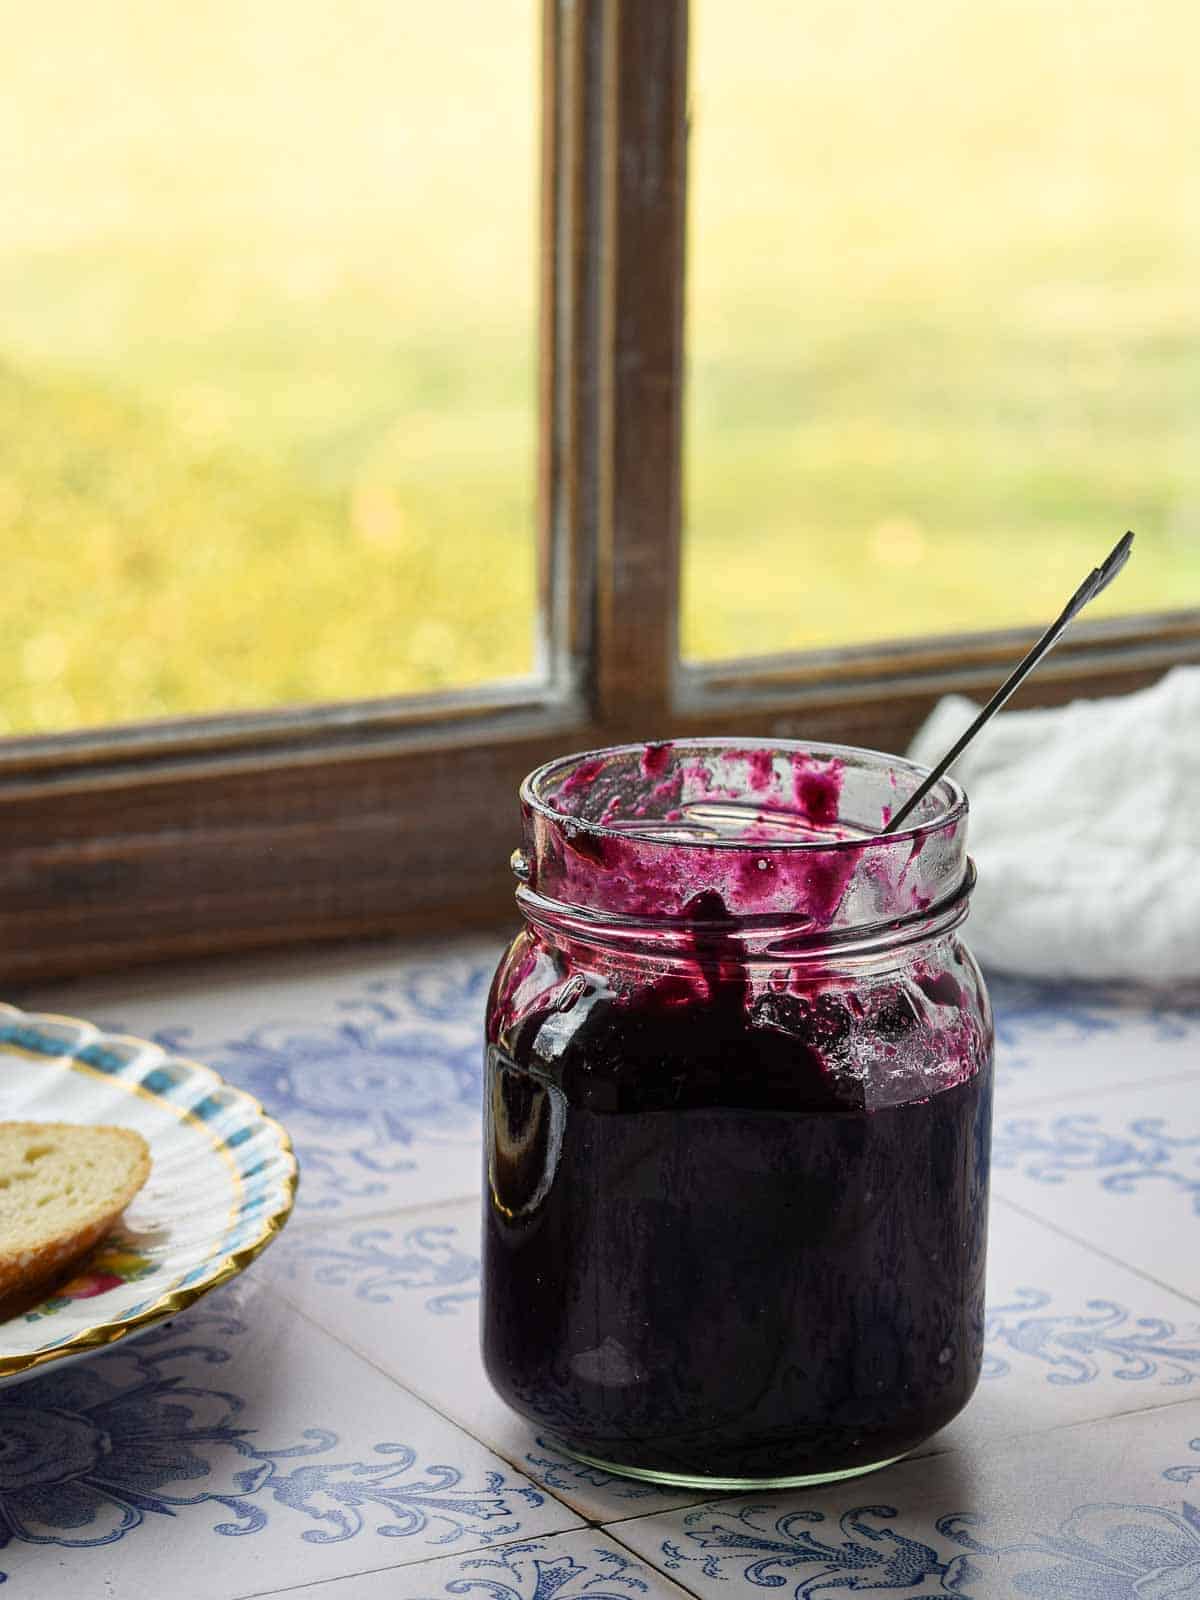 Blueberry earl grey jam in a glass jar by the window with light coming in.